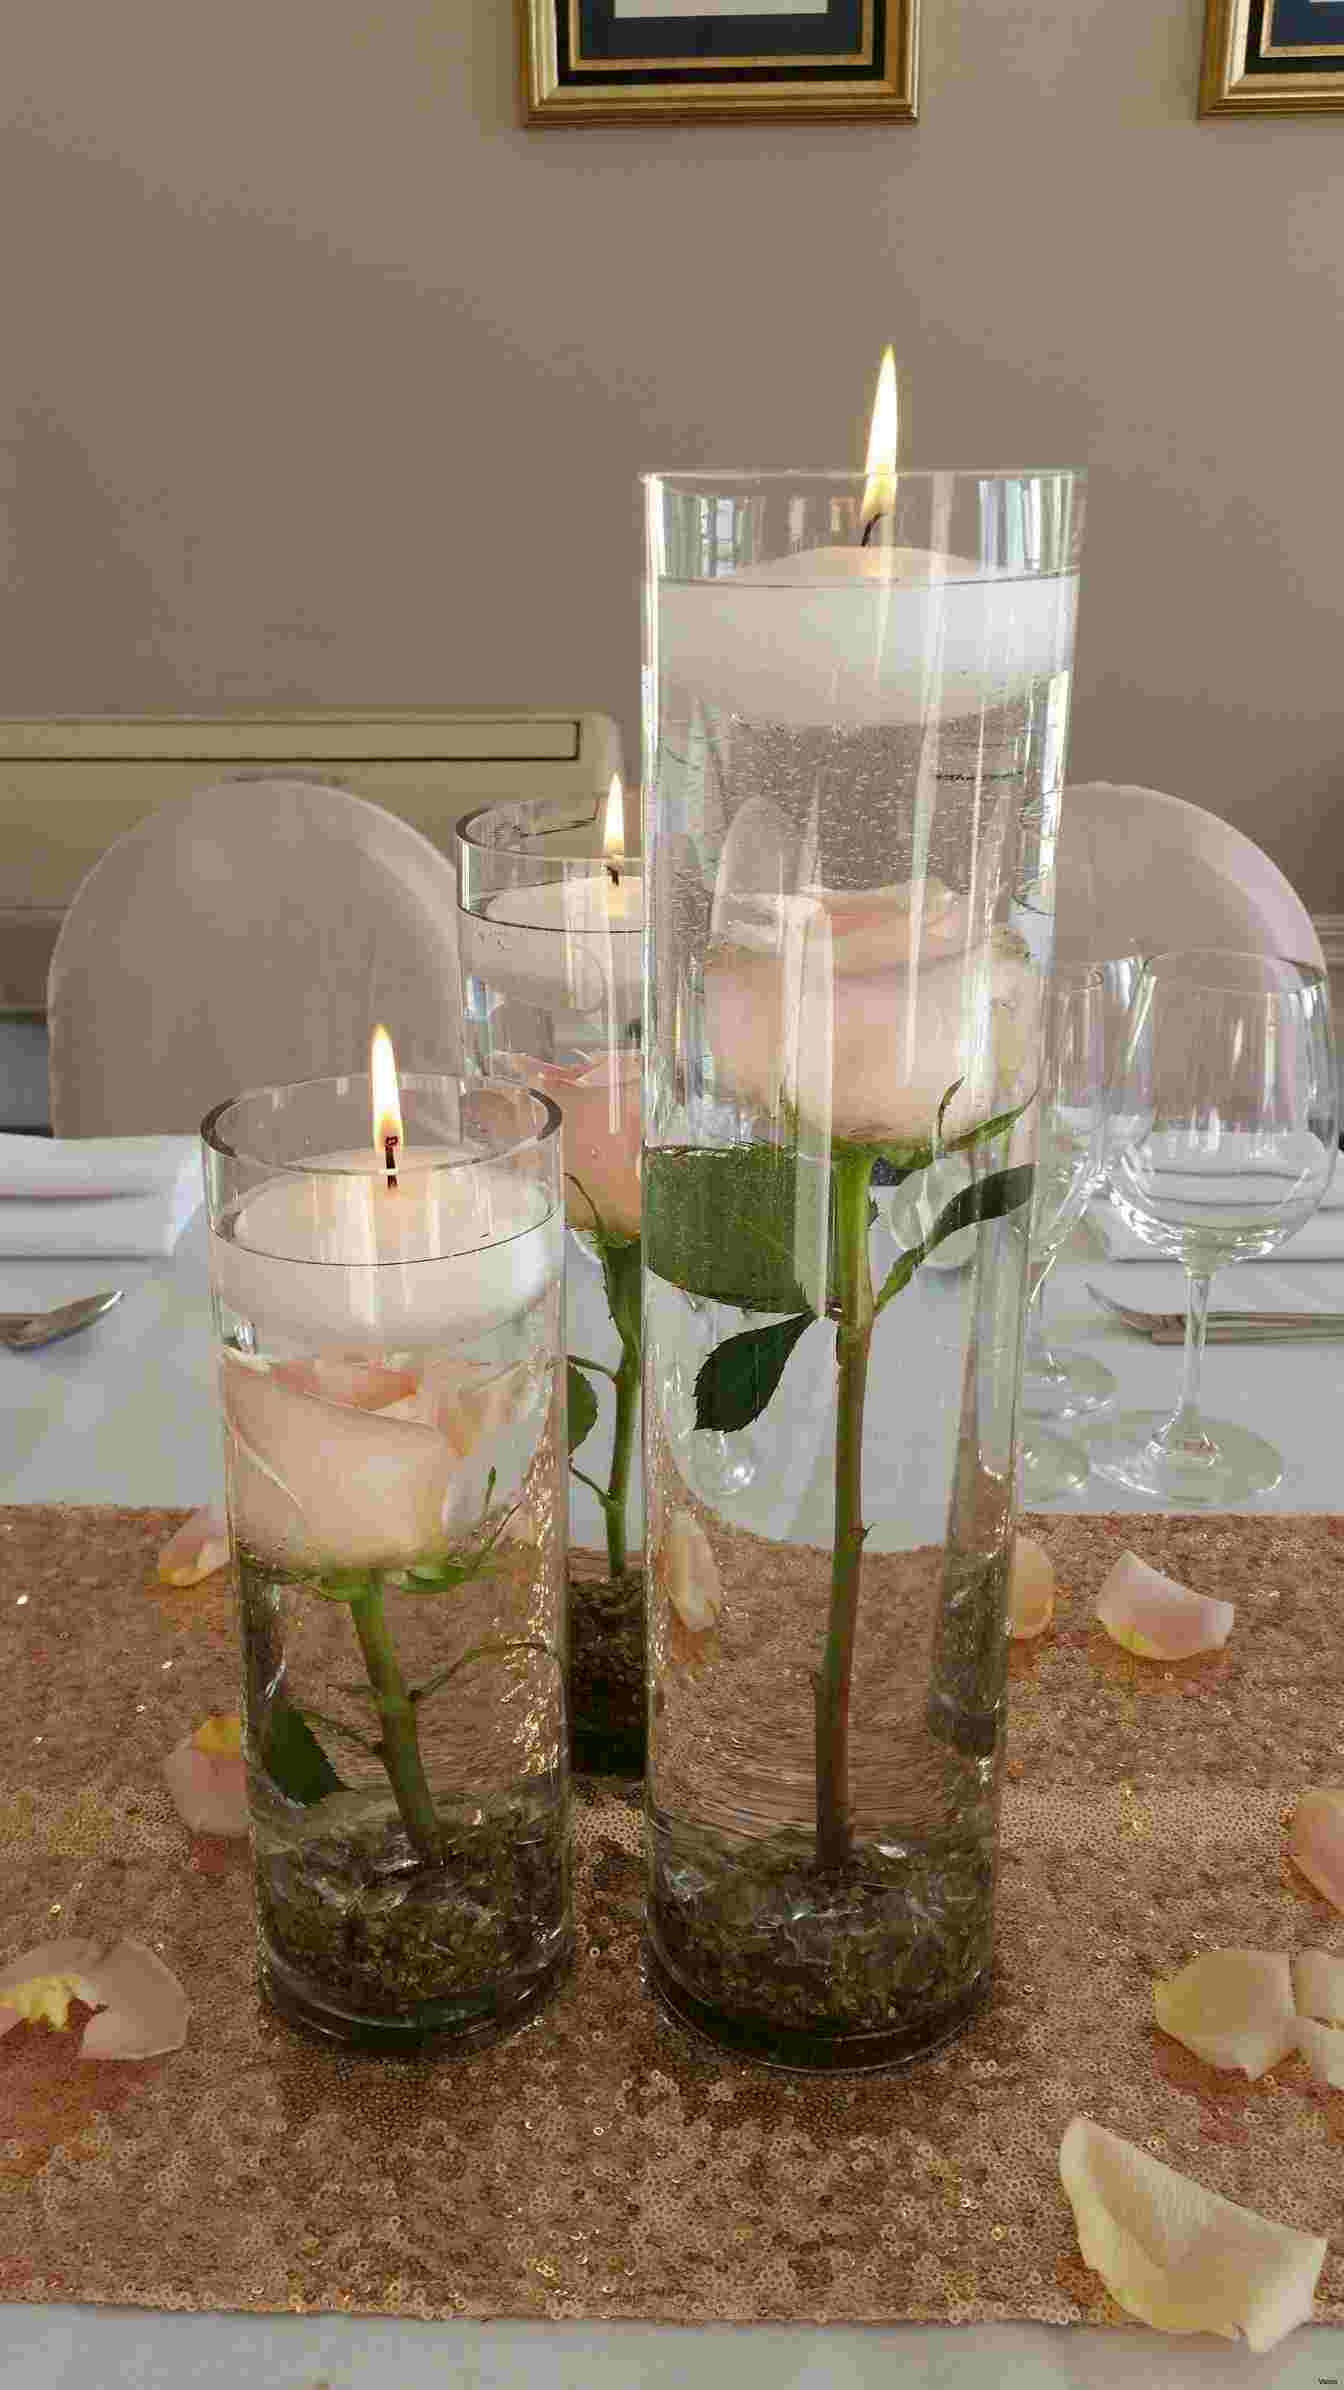 12 Unique Wedding Centerpieces Vases Floating Candles 2024 free download wedding centerpieces vases floating candles of mason jar vase awesome floating candle ideas luxury although tall with mason jar vase awesome floating candle ideas luxury although tall vase c